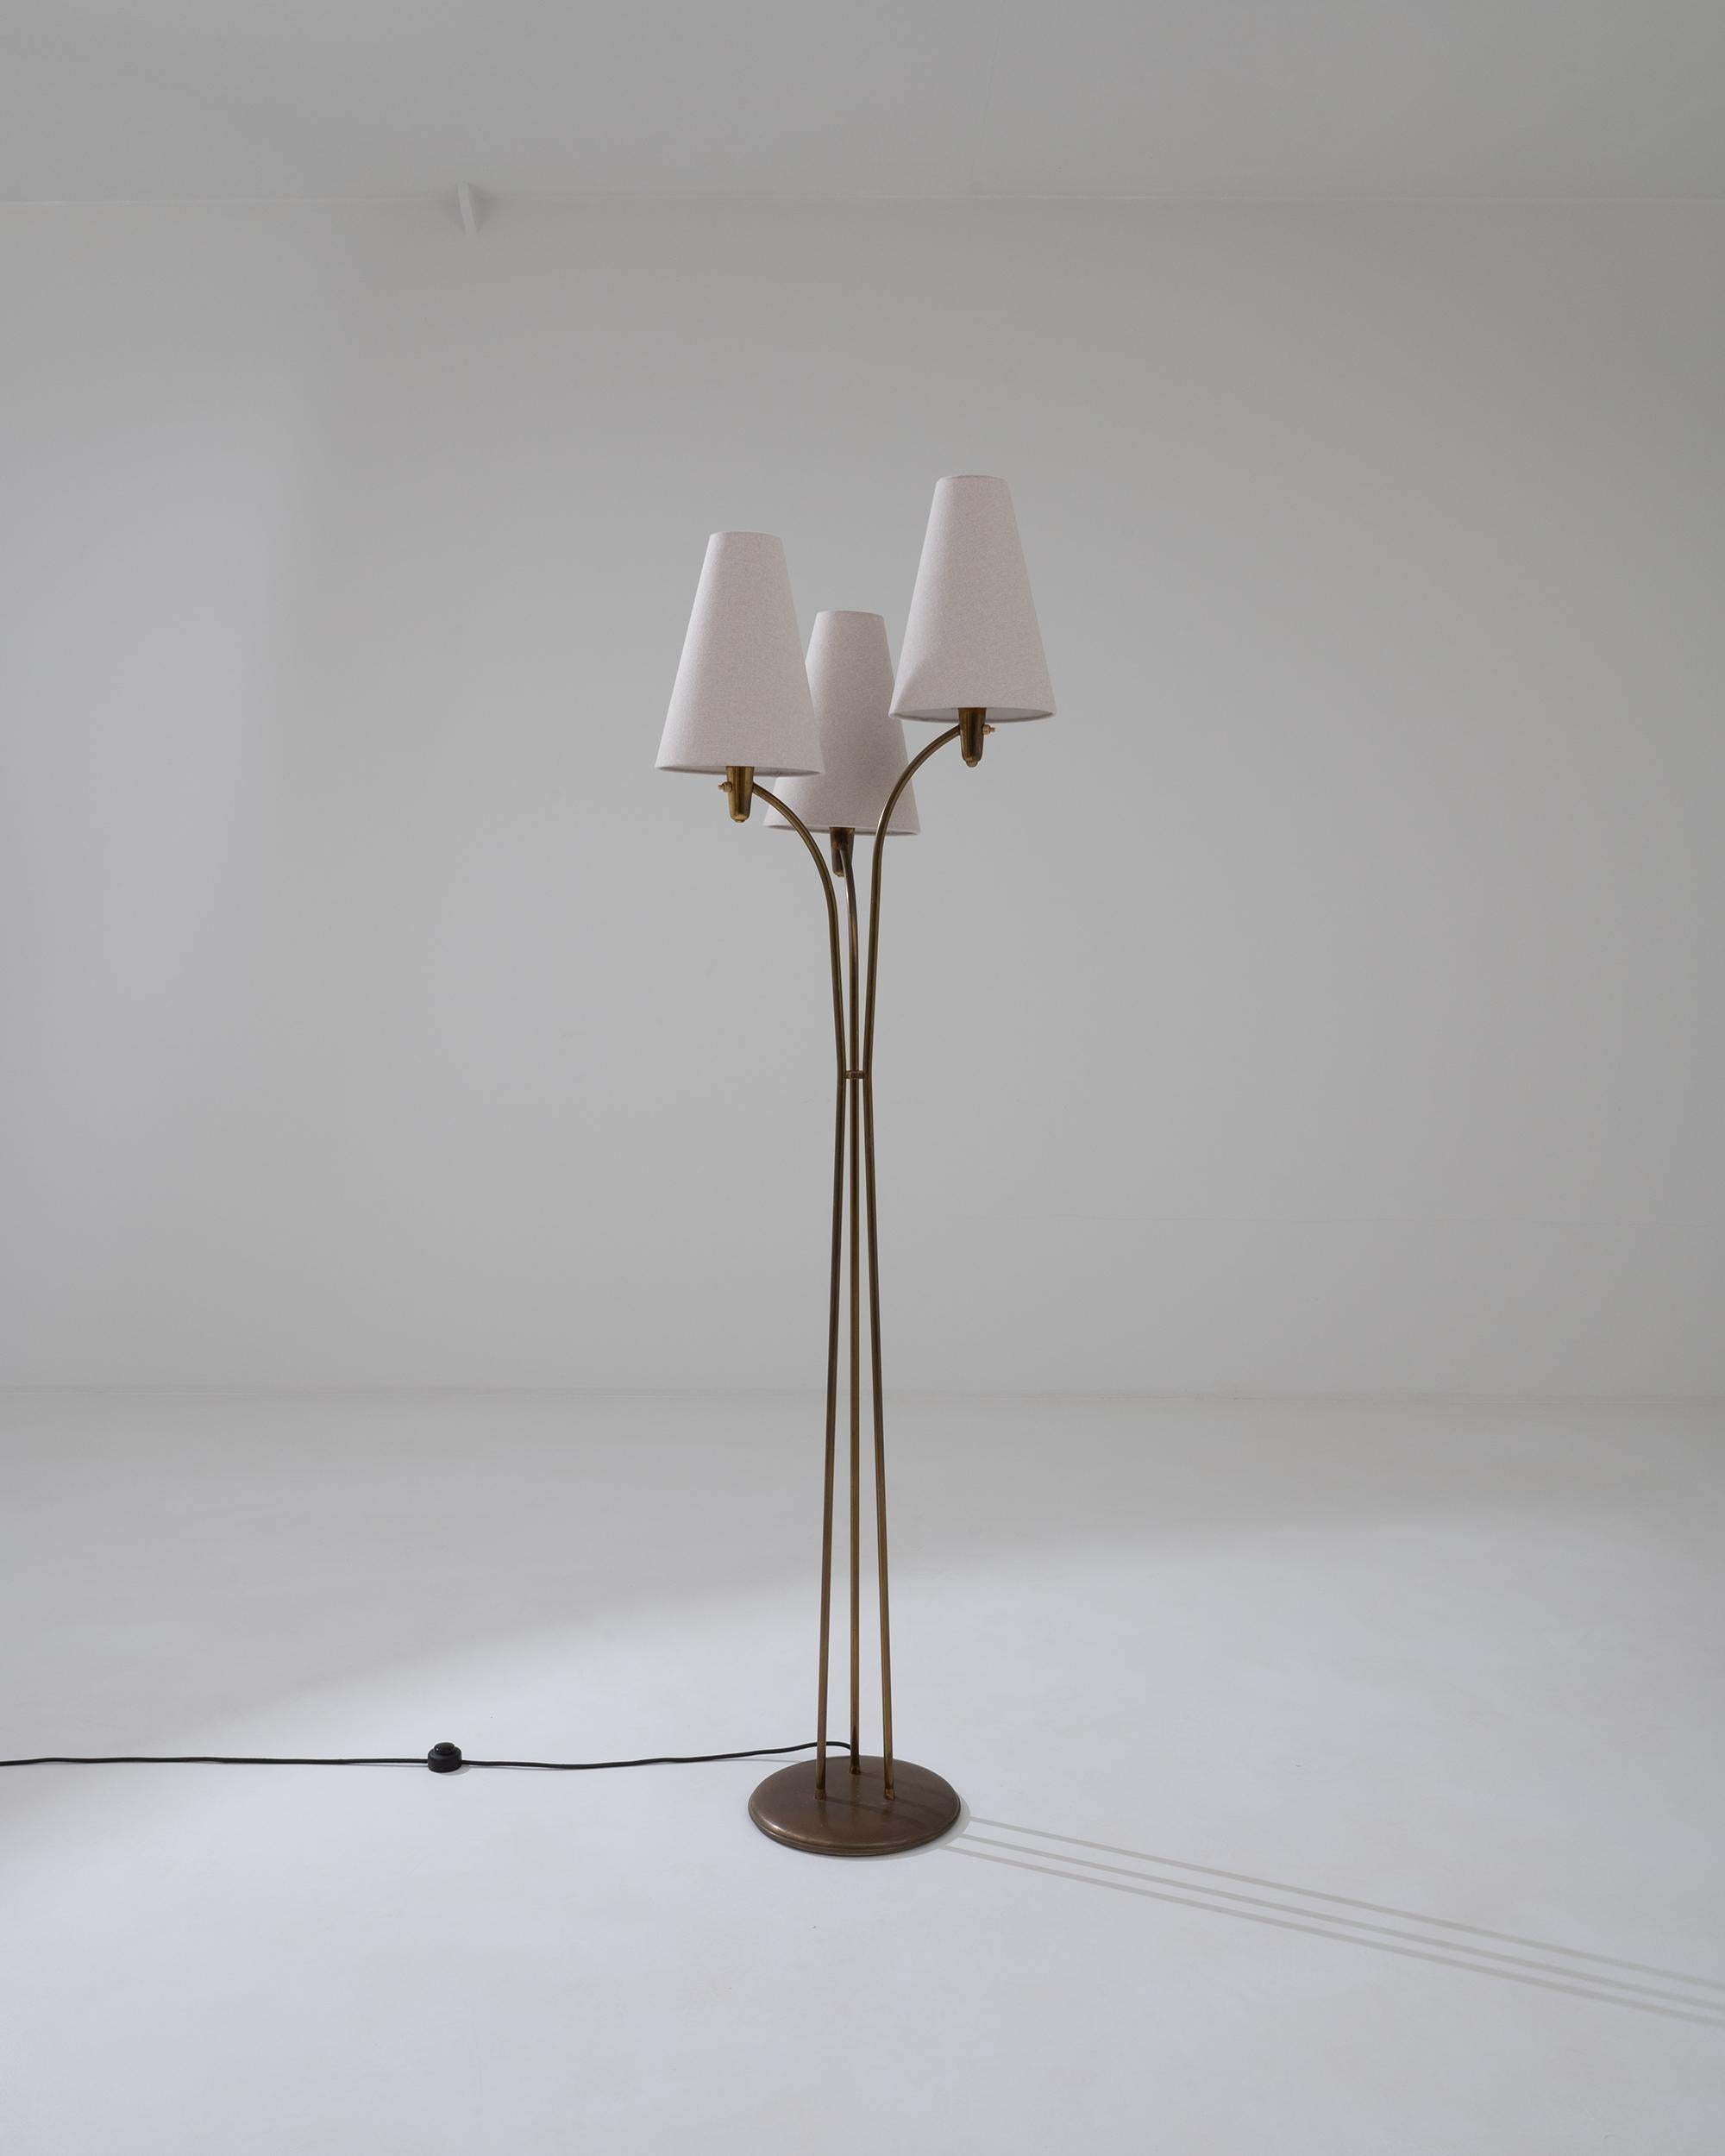 This distinctive floor lamp, designed in France during the 20th century, features a unique tripod structure with three lights that playfully emerge from a circular metal base. The triangle-shaped white lampshades are supported by gracefully inclined